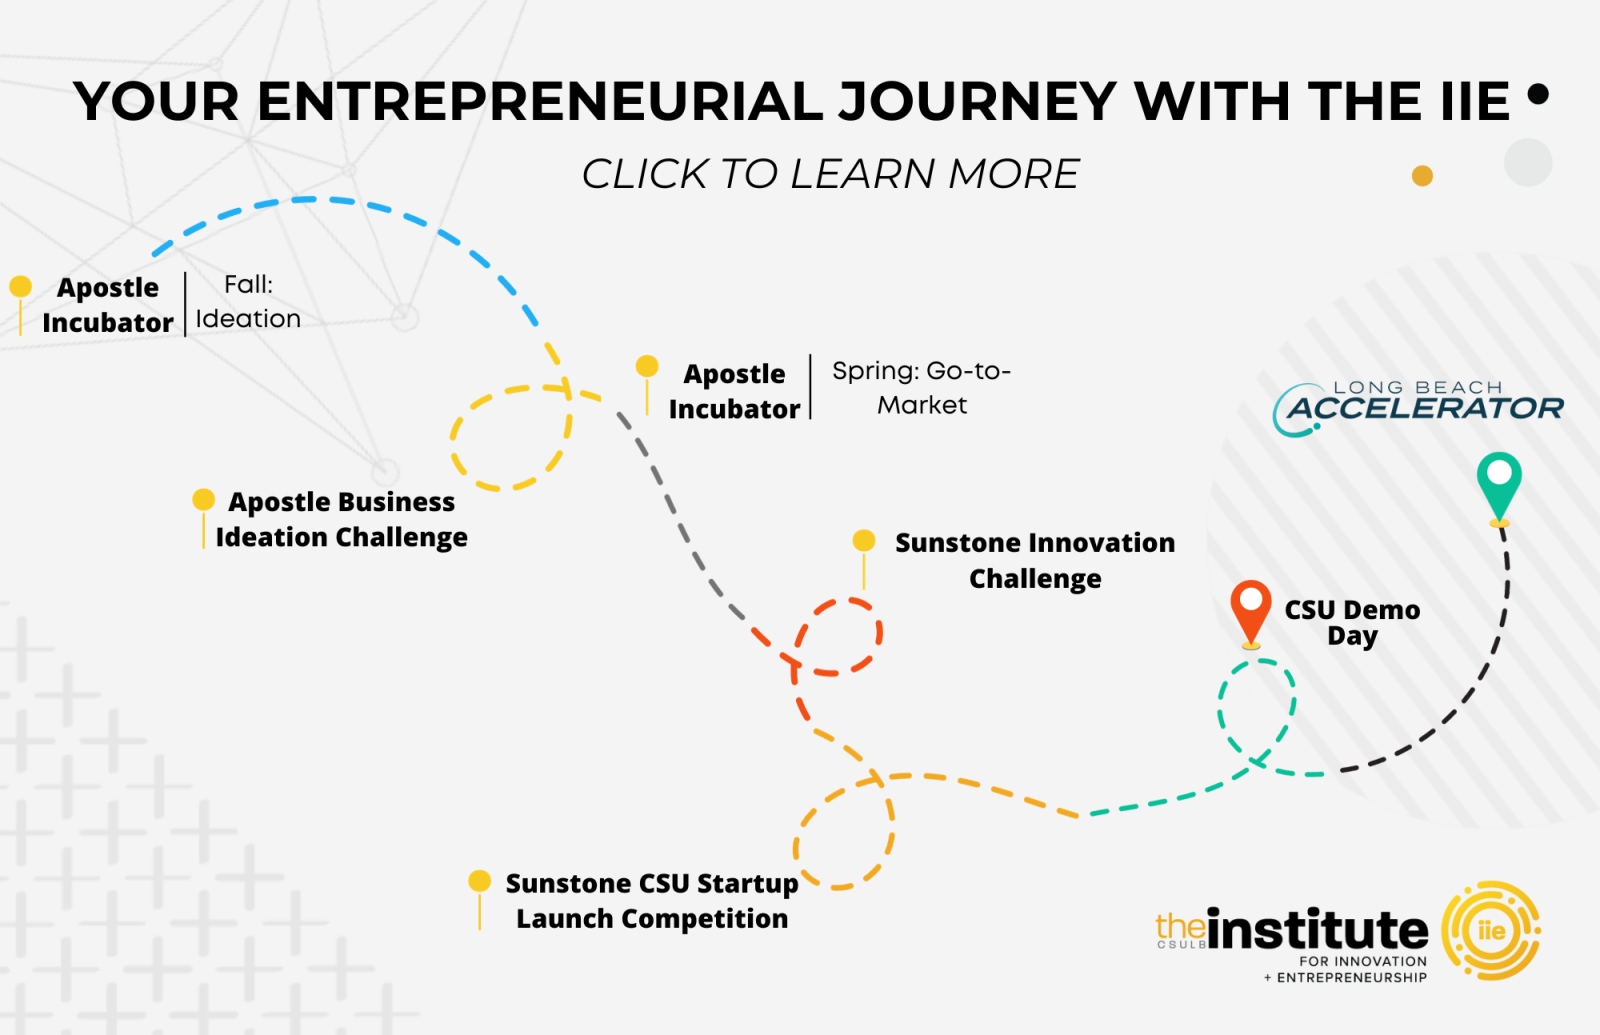 Your Entrepreneurial Journey With the IIE. Dotted lines taking you through the different programs IIE offers